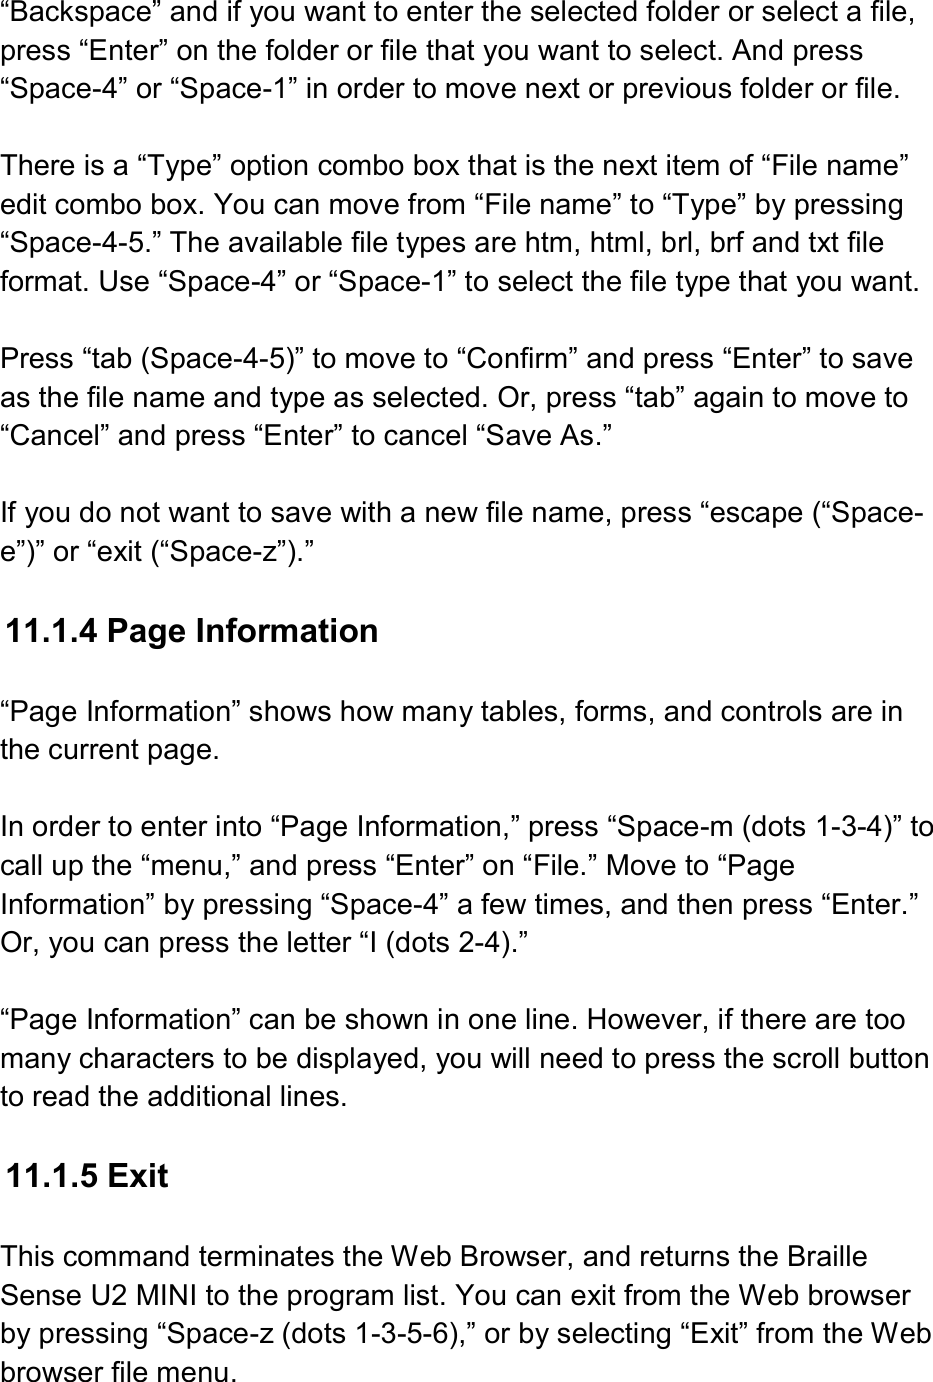  “Backspace” and if you want to enter the selected folder or select a file, press “Enter” on the folder or file that you want to select. And press “Space-4” or “Space-1” in order to move next or previous folder or file.    There is a “Type” option combo box that is the next item of “File name” edit combo box. You can move from “File name” to “Type” by pressing “Space-4-5.” The available file types are htm, html, brl, brf and txt file format. Use “Space-4” or “Space-1” to select the file type that you want.  Press “tab (Space-4-5)” to move to “Confirm” and press “Enter” to save as the file name and type as selected. Or, press “tab” again to move to “Cancel” and press “Enter” to cancel “Save As.”  If you do not want to save with a new file name, press “escape (“Space-e”)” or “exit (“Space-z”).”  11.1.4 Page Information  “Page Information” shows how many tables, forms, and controls are in the current page.  In order to enter into “Page Information,” press “Space-m (dots 1-3-4)” to call up the “menu,” and press “Enter” on “File.” Move to “Page Information” by pressing “Space-4” a few times, and then press “Enter.” Or, you can press the letter “I (dots 2-4).”  “Page Information” can be shown in one line. However, if there are too many characters to be displayed, you will need to press the scroll button to read the additional lines.  11.1.5 Exit  This command terminates the Web Browser, and returns the Braille Sense U2 MINI to the program list. You can exit from the Web browser by pressing “Space-z (dots 1-3-5-6),” or by selecting “Exit” from the Web browser file menu. 